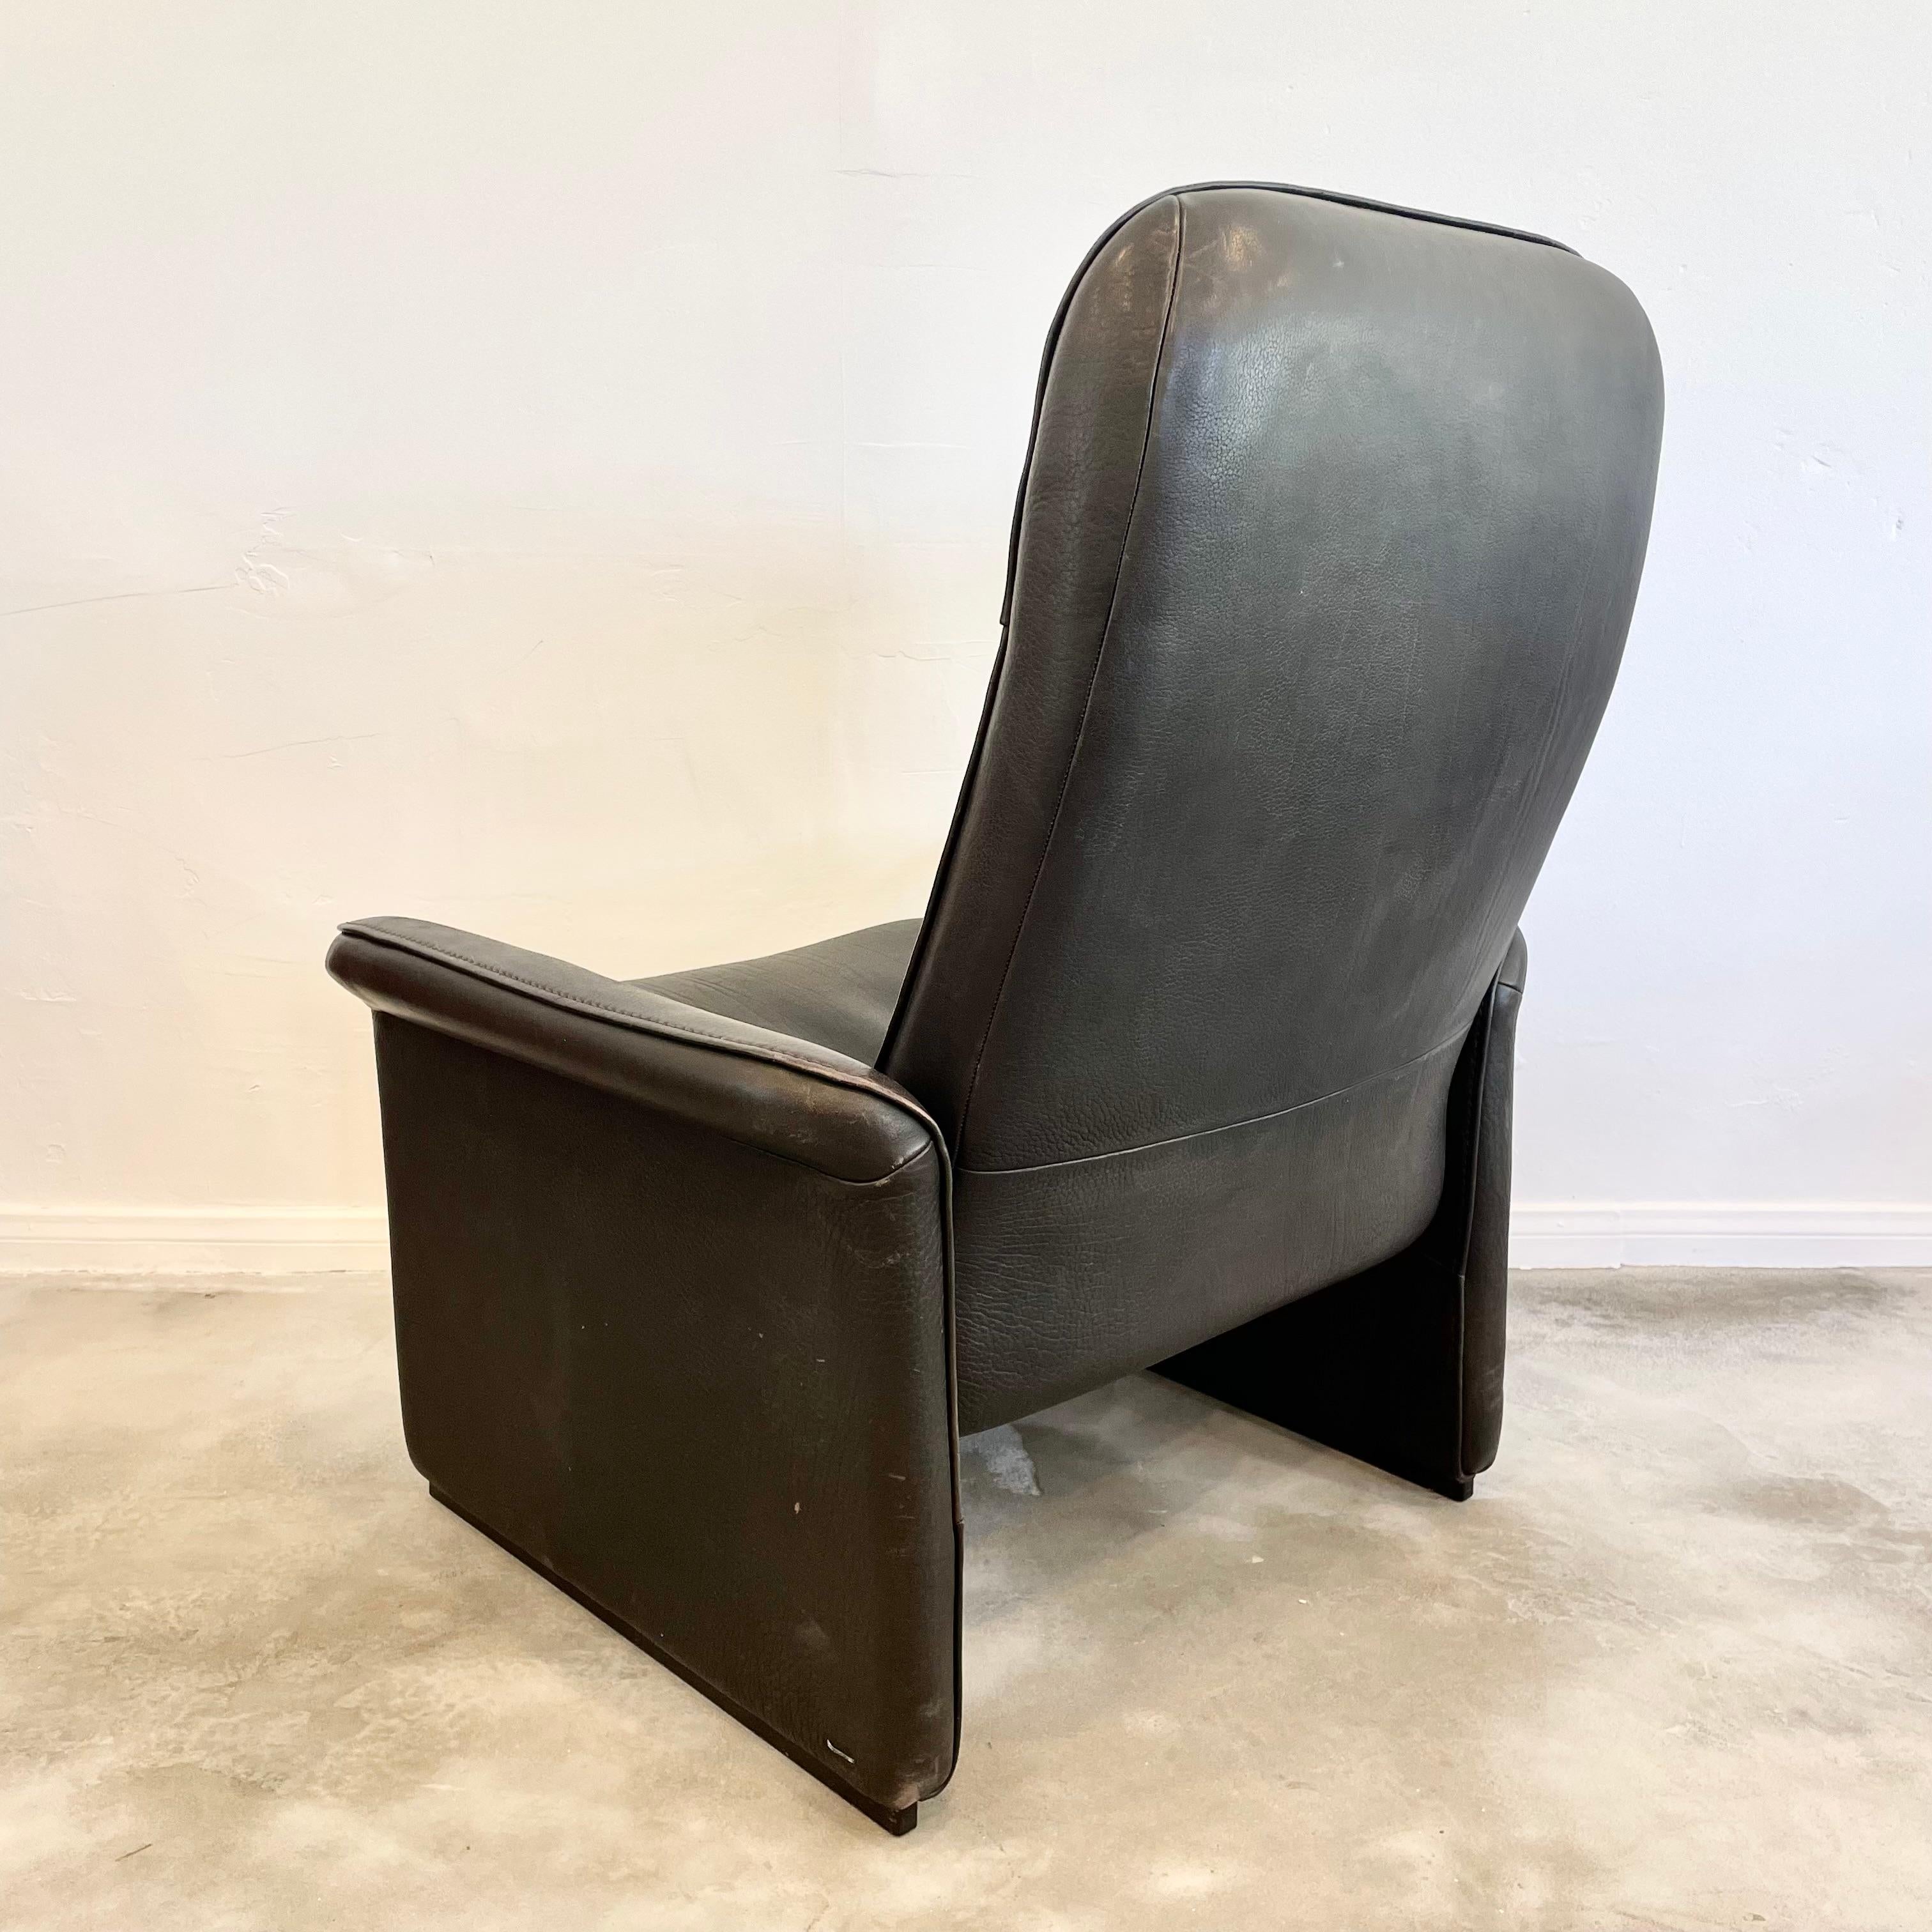 Pair of De Sede DS-50 Black Leather Recliner Chairs, 1970s Switzerland For Sale 9